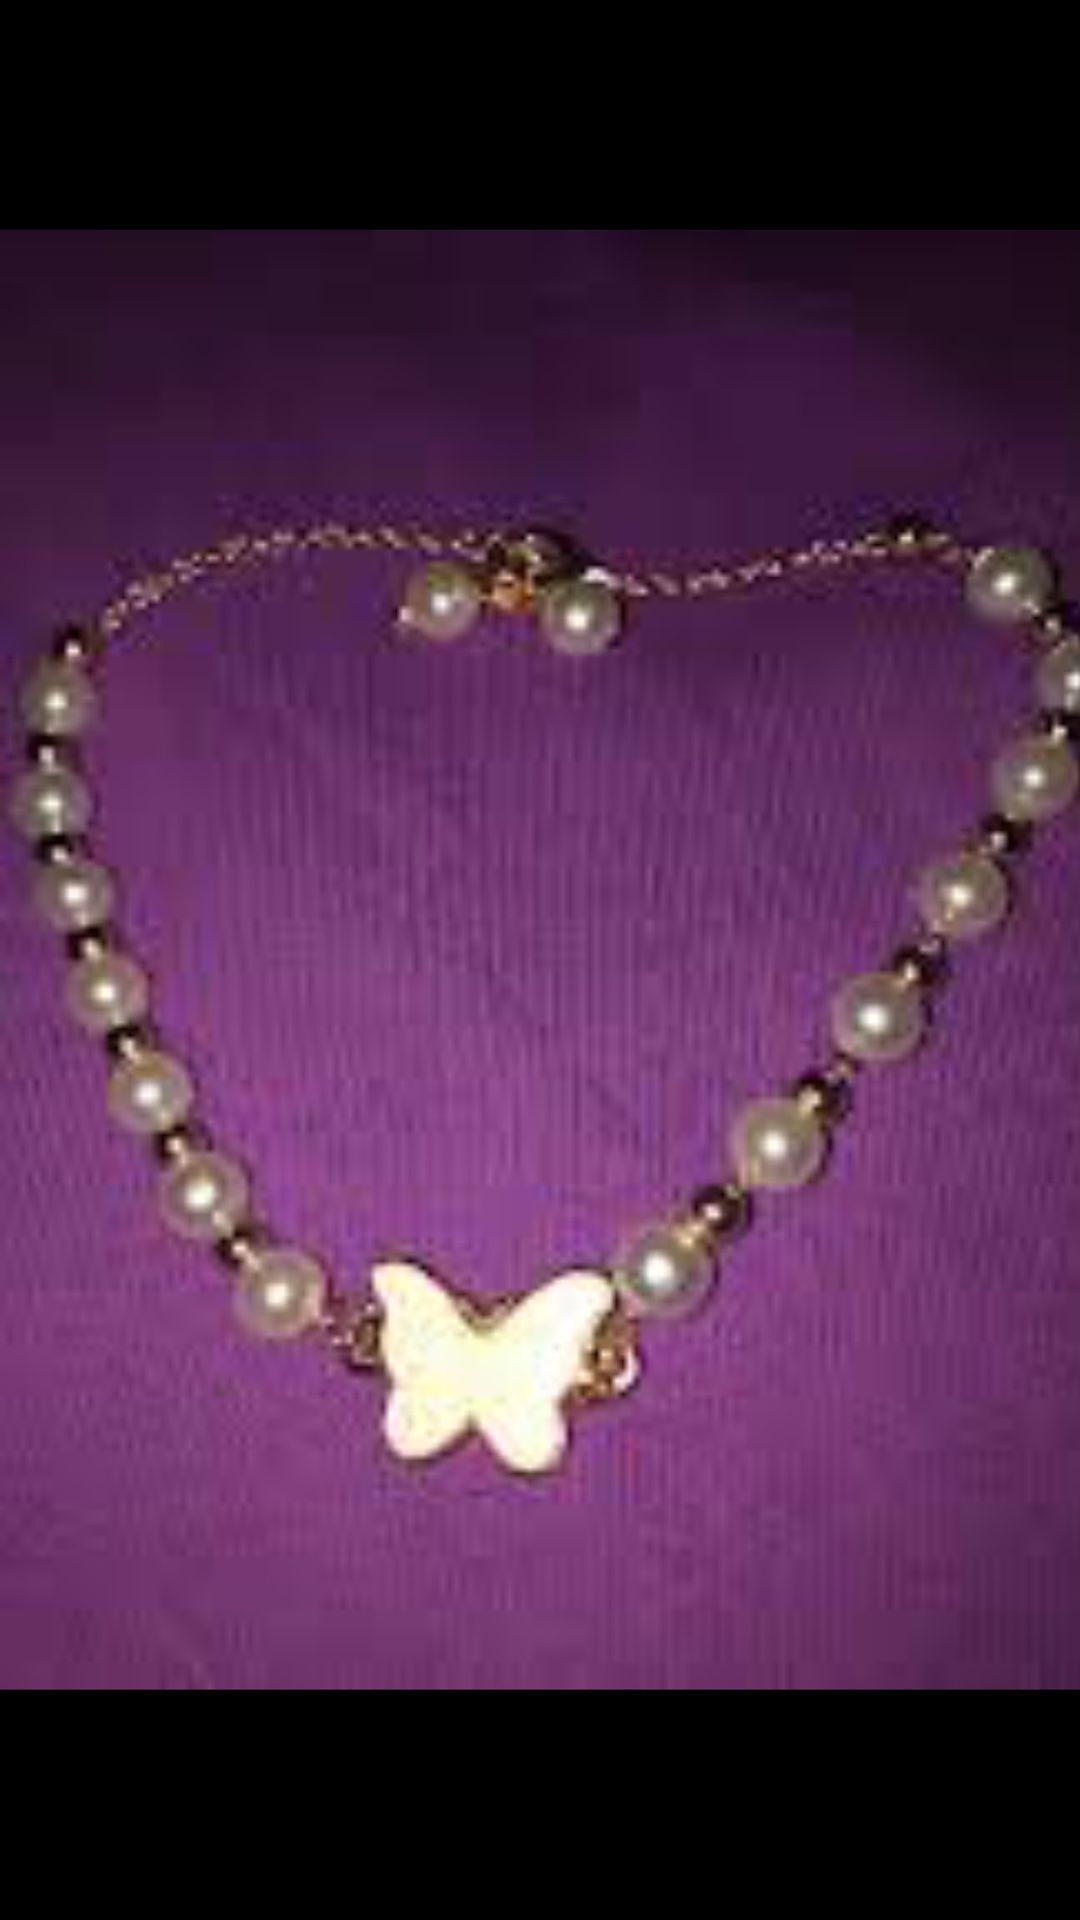 Butterfly adjustable Childs anklet